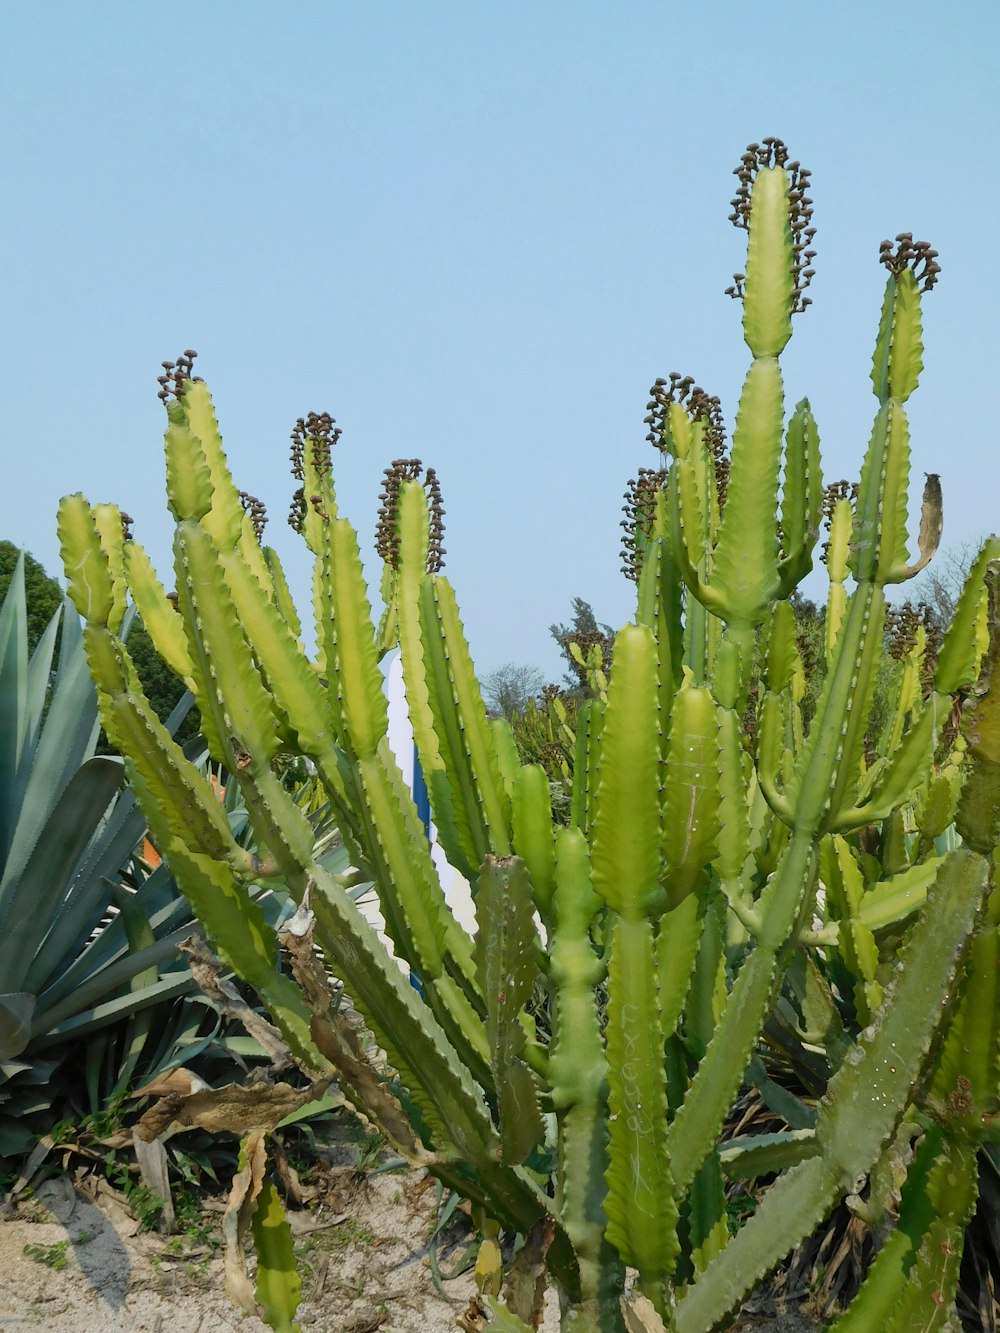 a large green cactus plant in a field